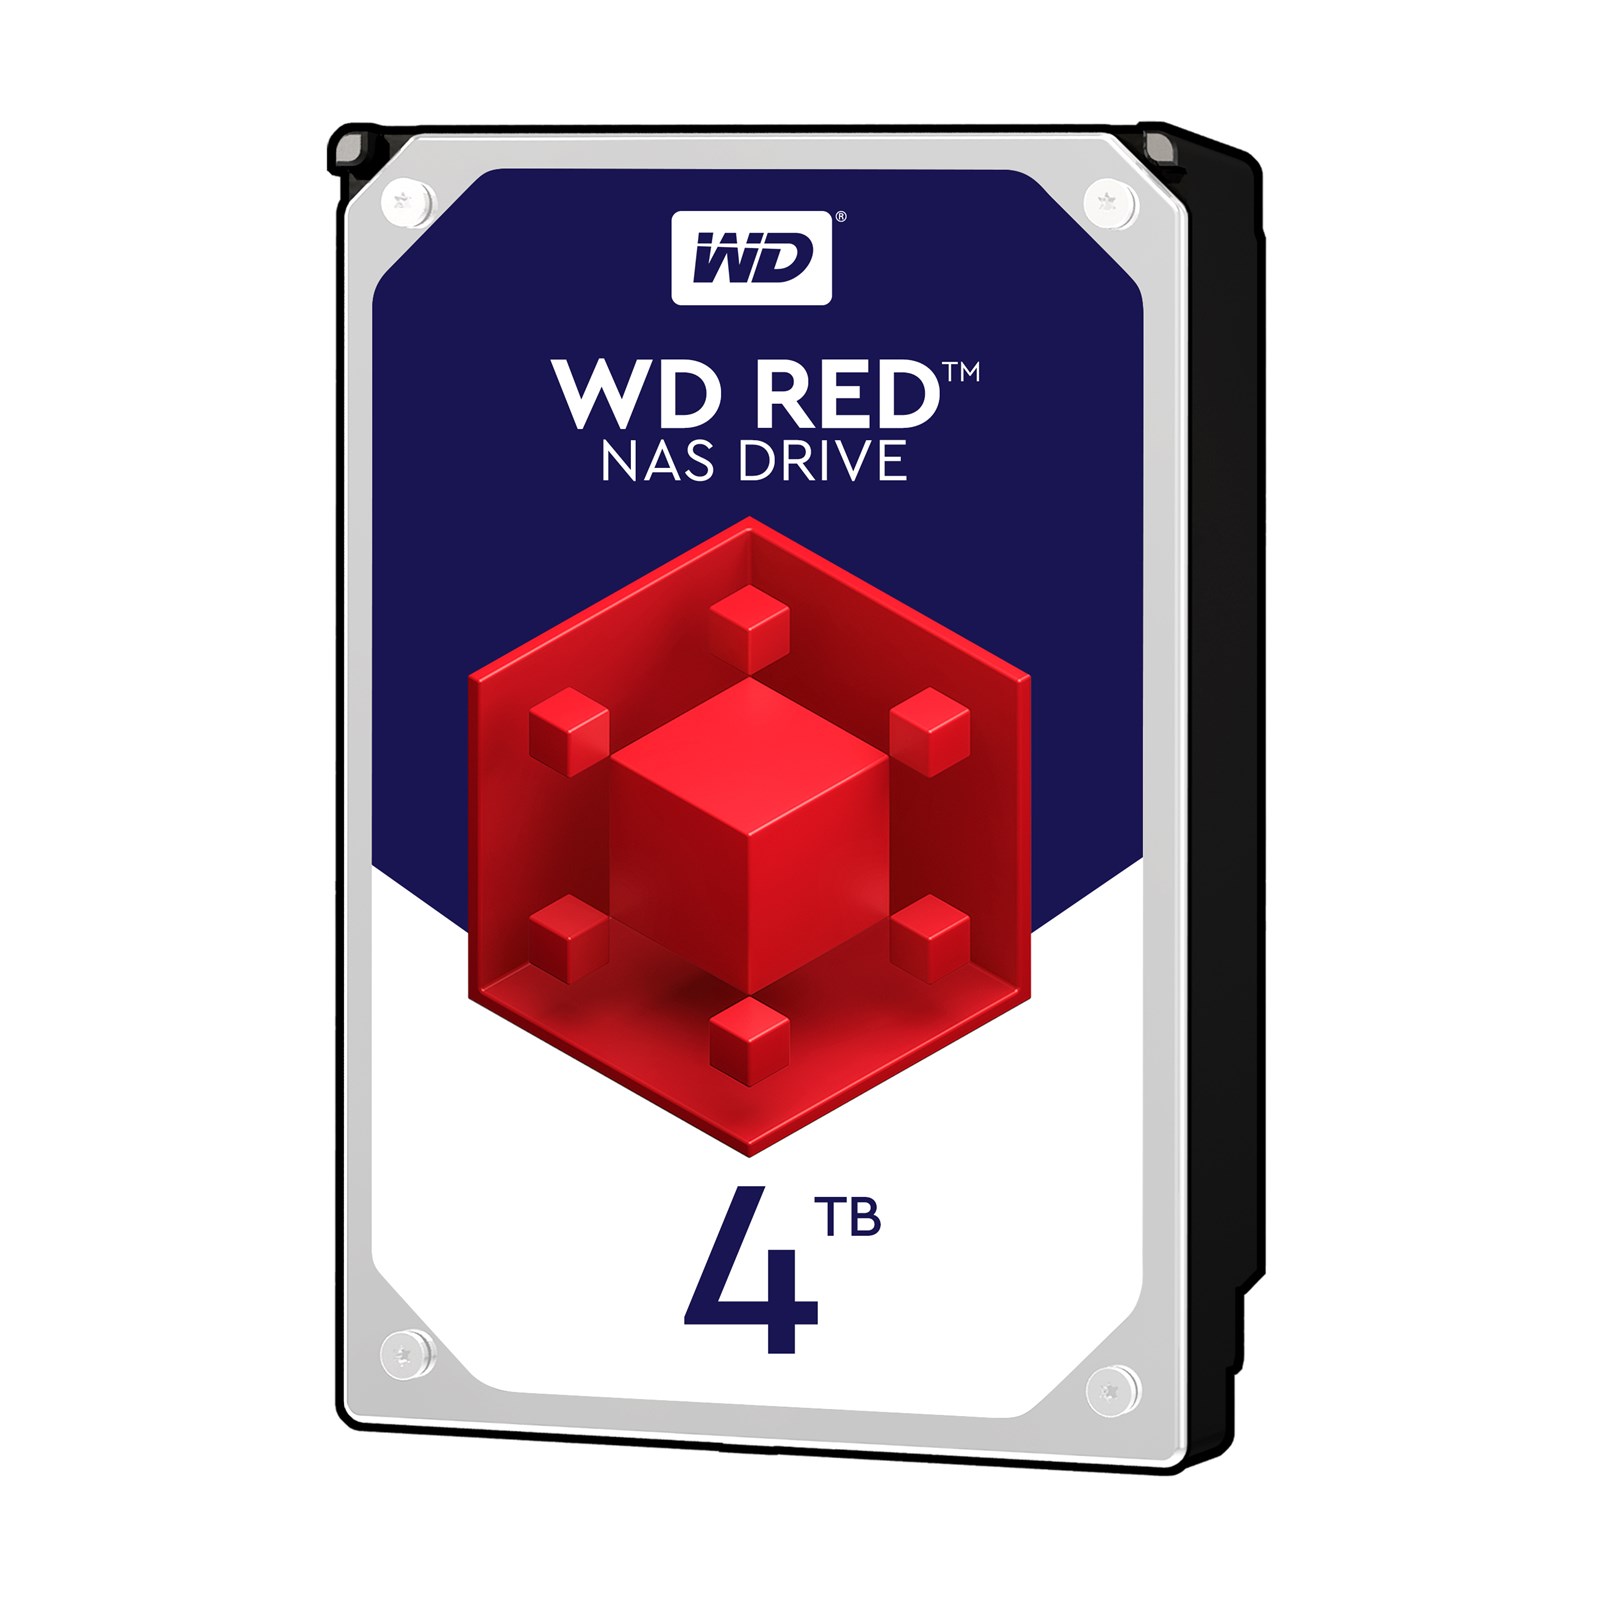 WD RED 4TB 5400RPM 64MB SATA3 6Gbit/sn WD40EFRX NAS HDD